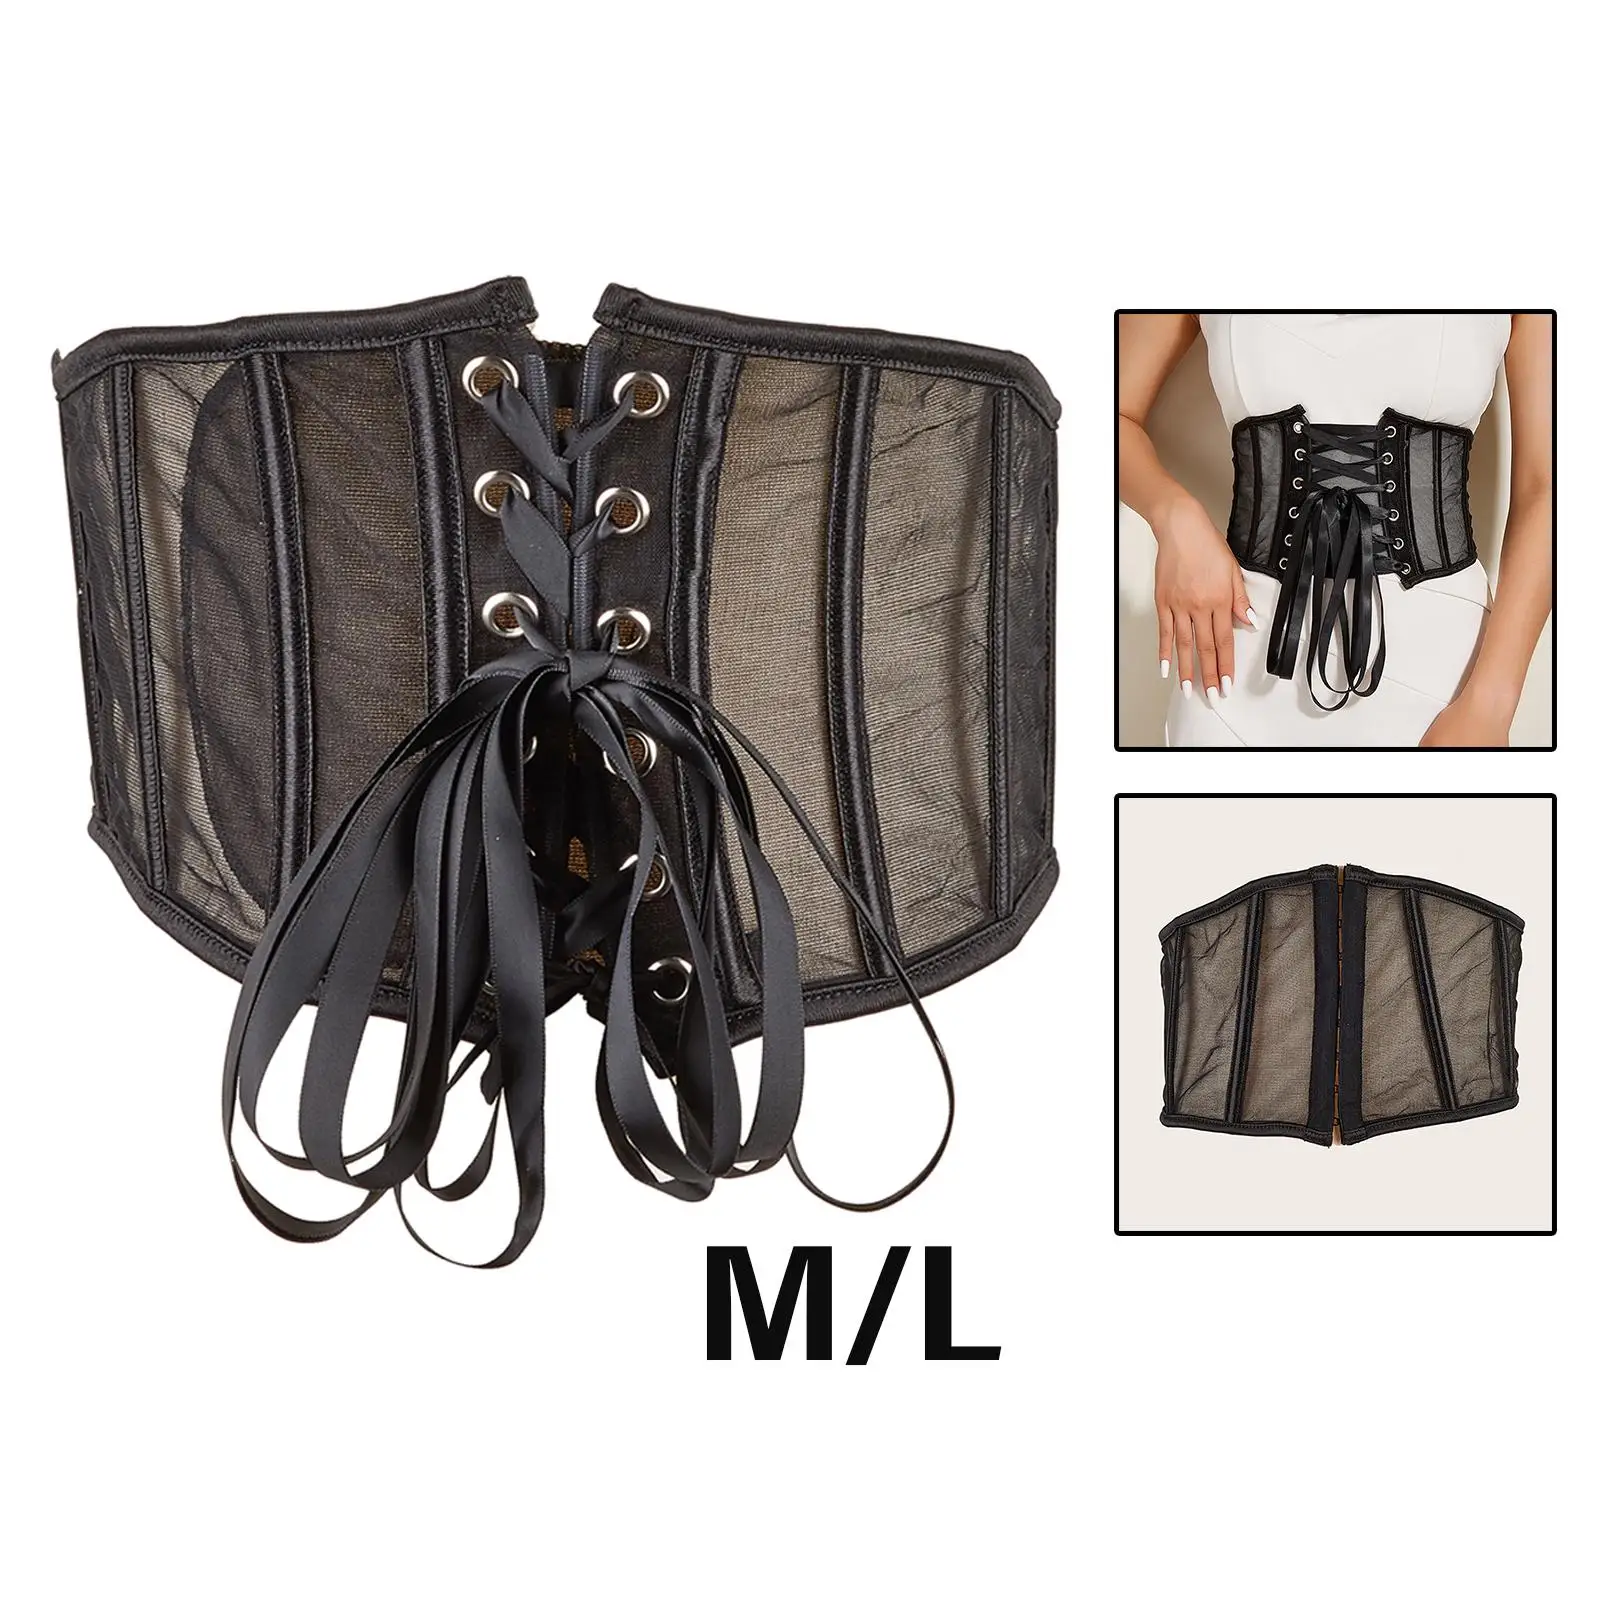 Stylish Women`s Waist Belt Cincher Underbust Corset Girdle Lace Tied for Slimming Costume Dress Accessories Clothing Halloween